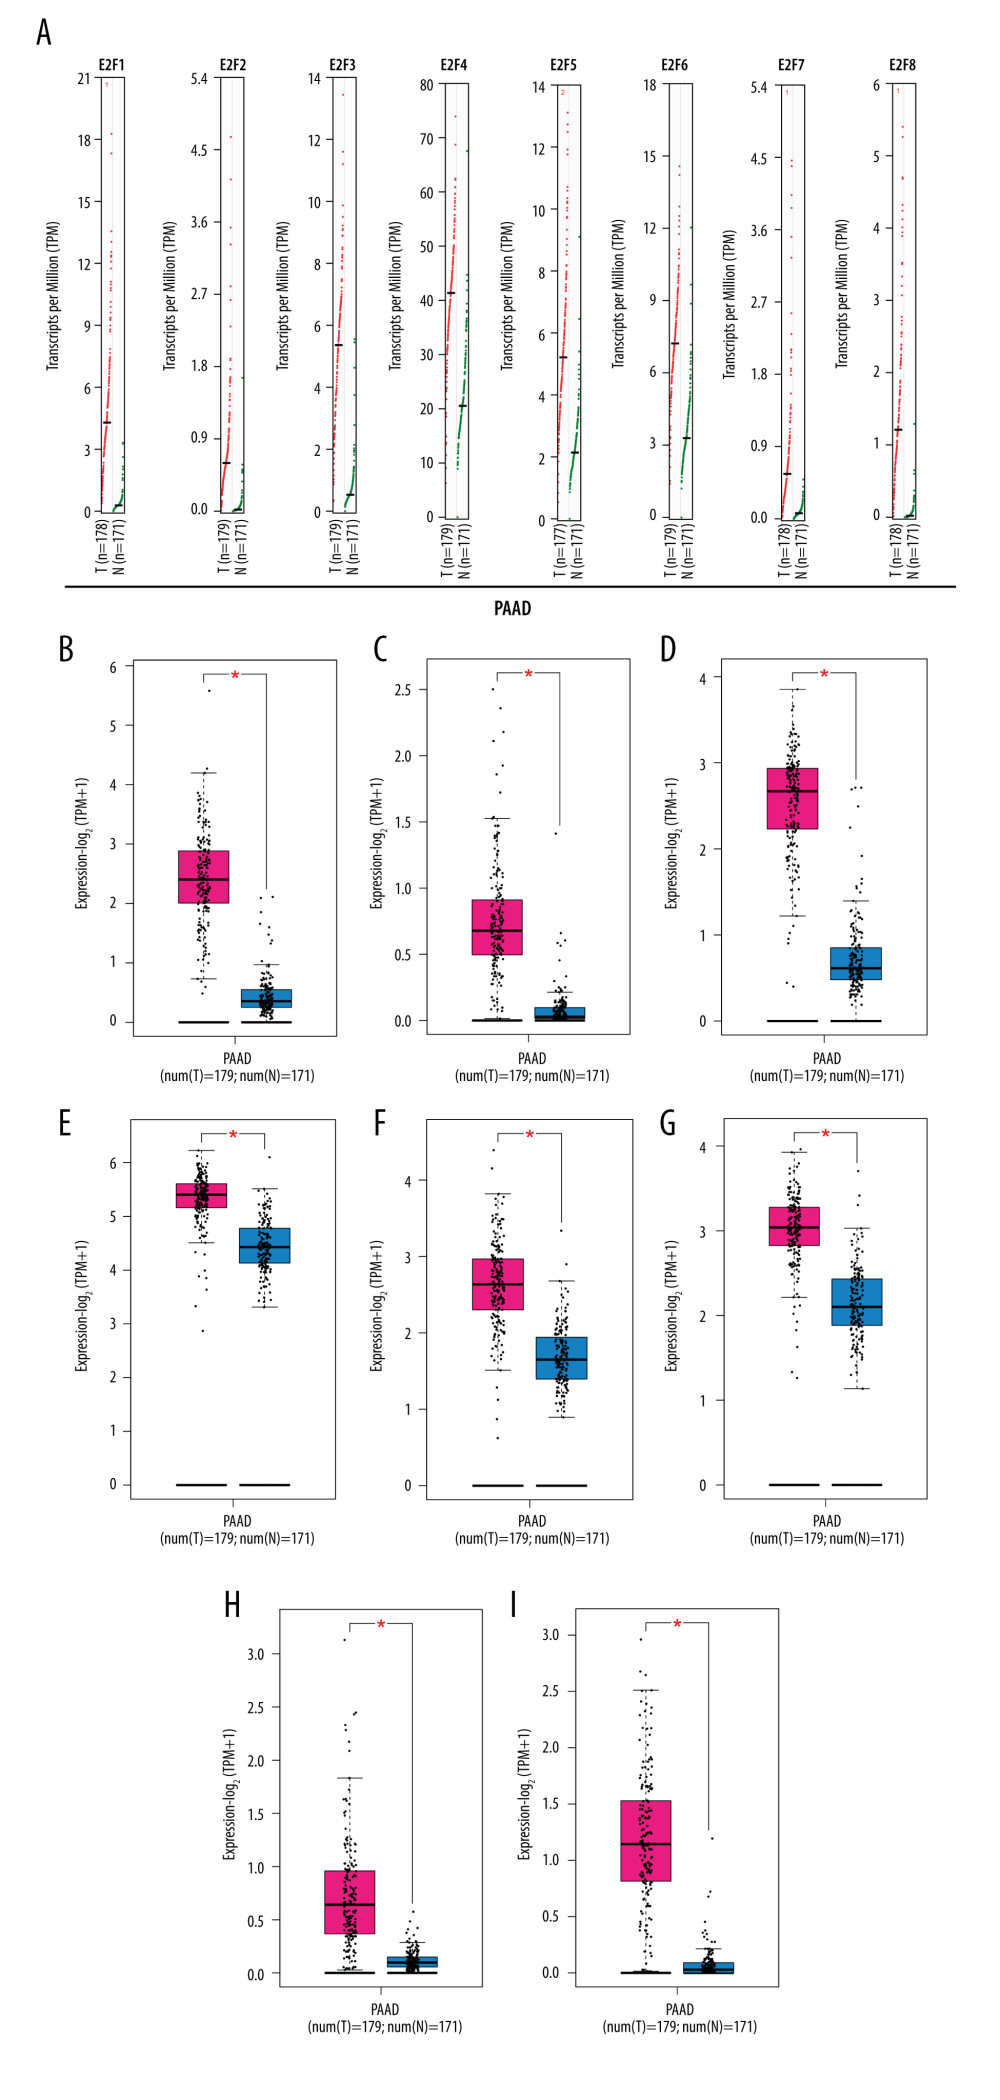 GEPIA-based assessment of E2F protein expression levels in PAAD. (A) Differential E2F protein expression in PAAD and normal tissue samples was assessed using the GEPIA database. (B–I) Box plots were used to demonstrate differences in E2F expression between PAAD and normal tissues in the GEPIA database.